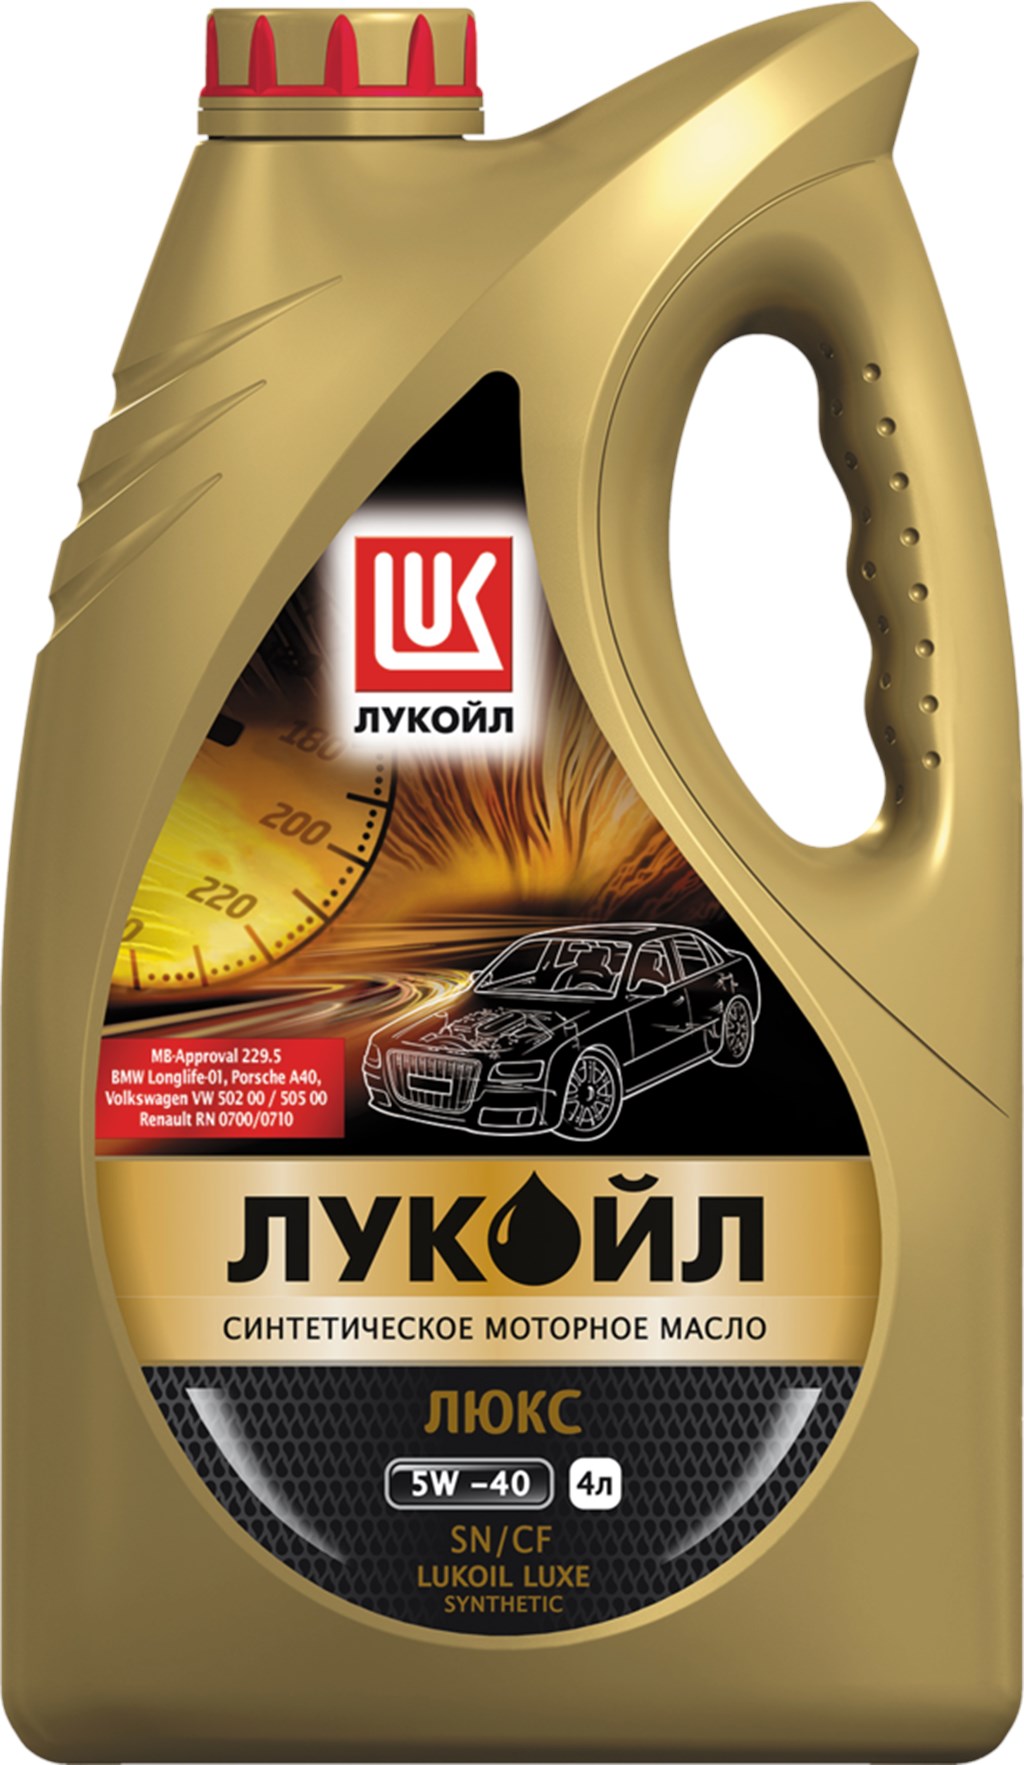 Масла лукойл люкс 5 40. Lukoil Luxe 5w-40. Лукойл-Люкс 5w40 4л синтетика. Лукойл Люкс 5w40 синтетика. Масло моторное Лукойл Люкс 5w40 синтетика.